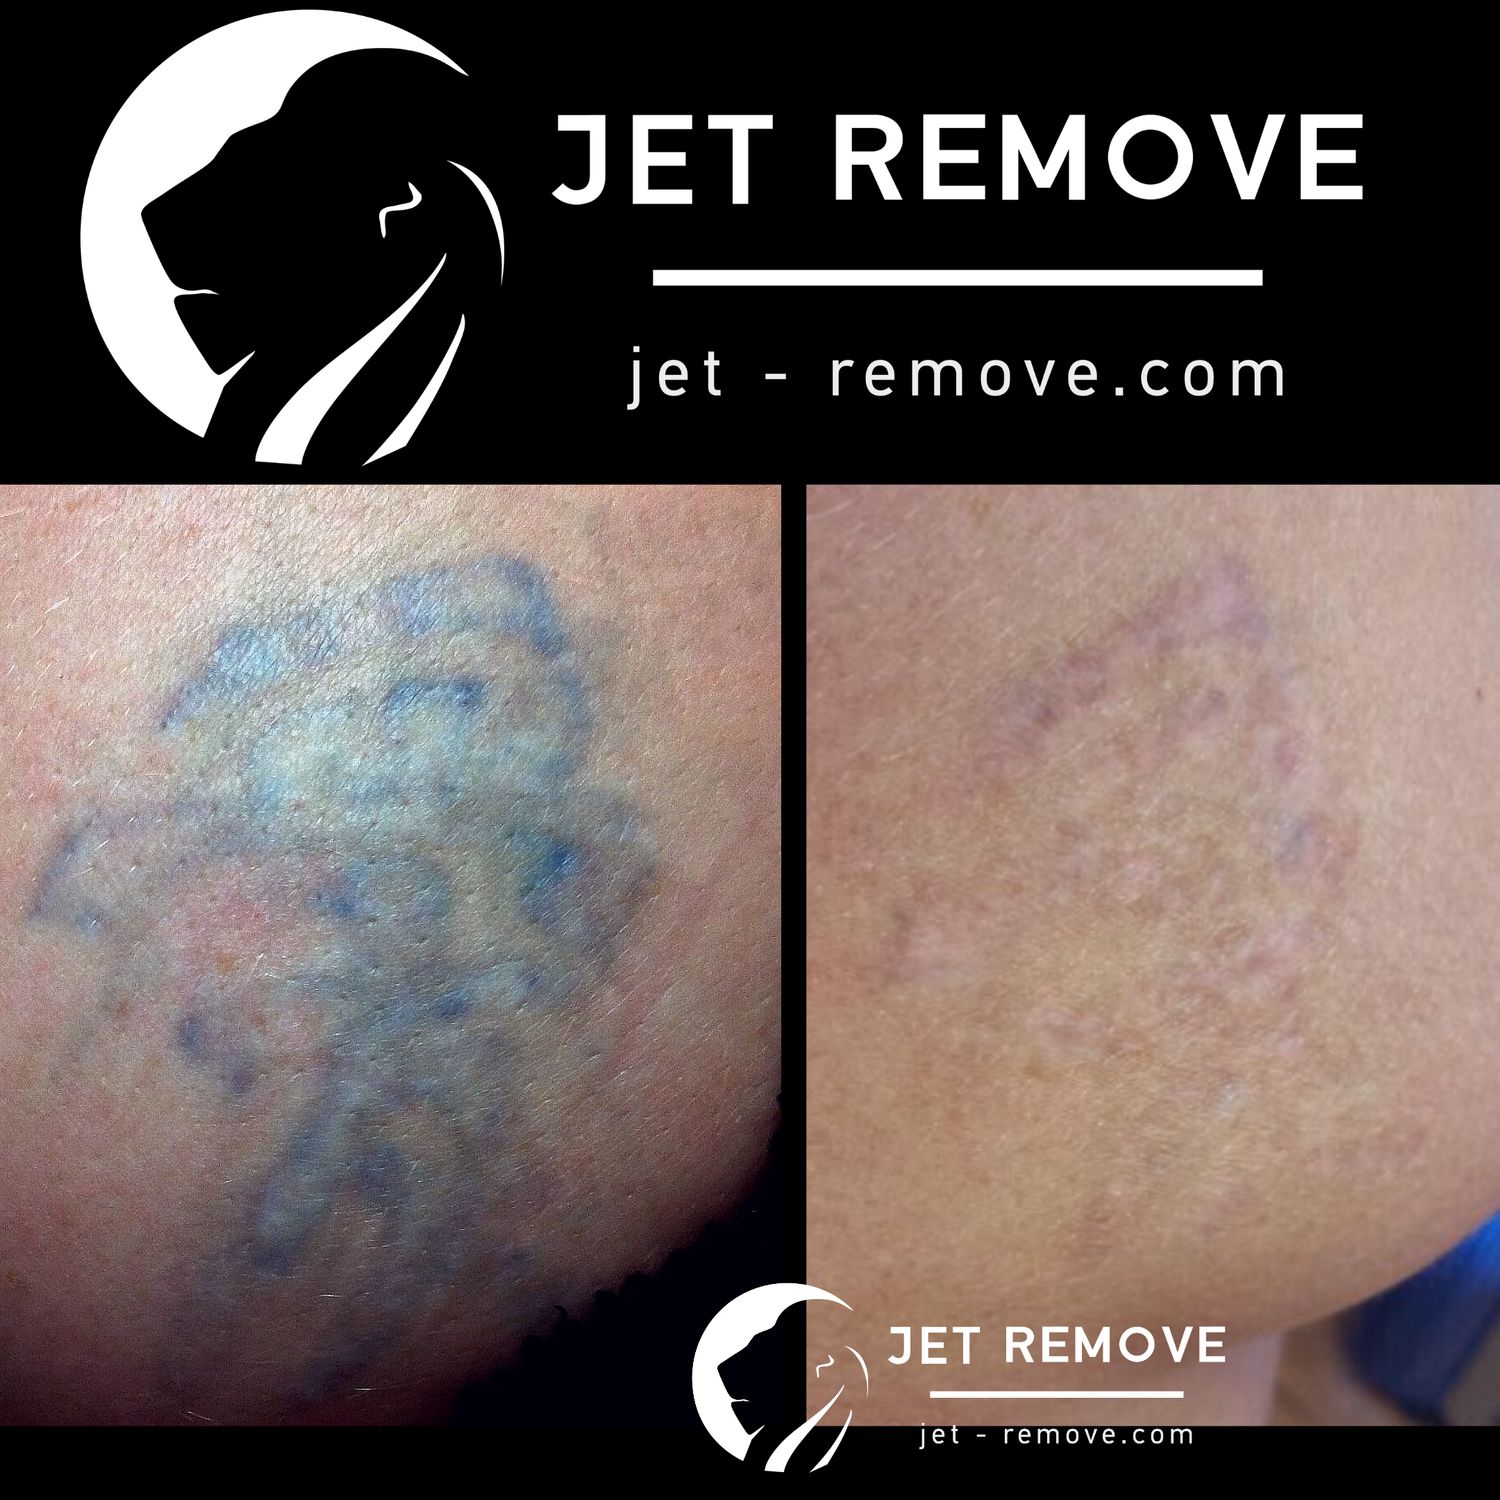 Debunking 6 Common Myths About Laser Tattoo Removal by Dan Martin - Issuu